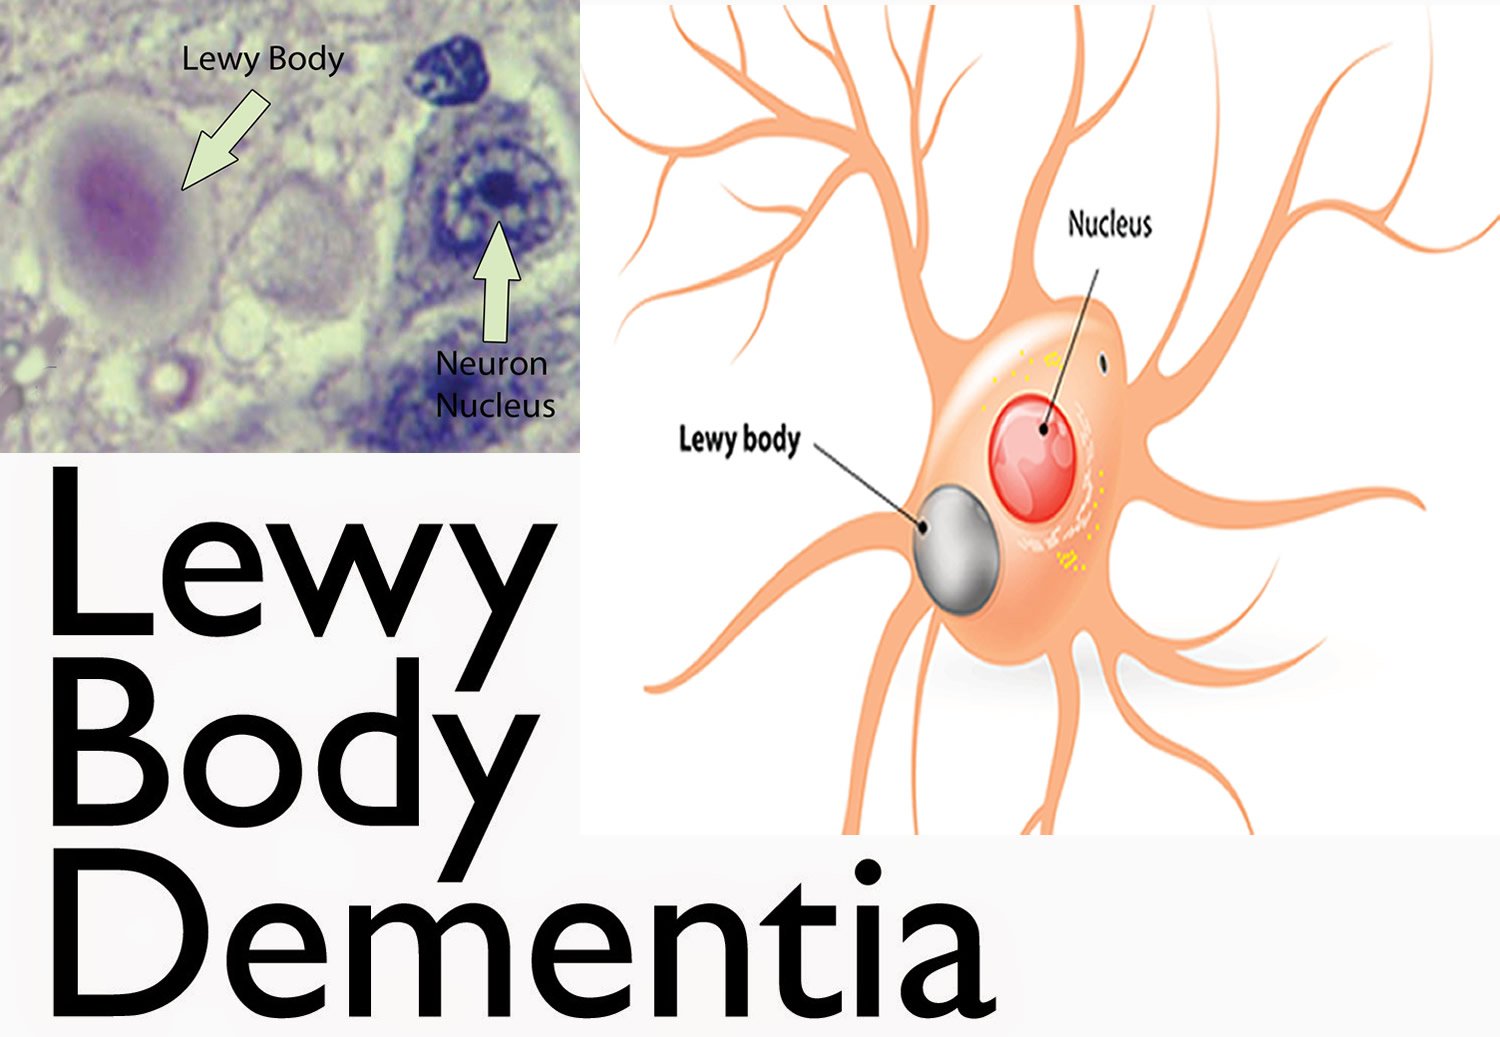 Lewy Body Dementia  Third Most Common Form of Dementia